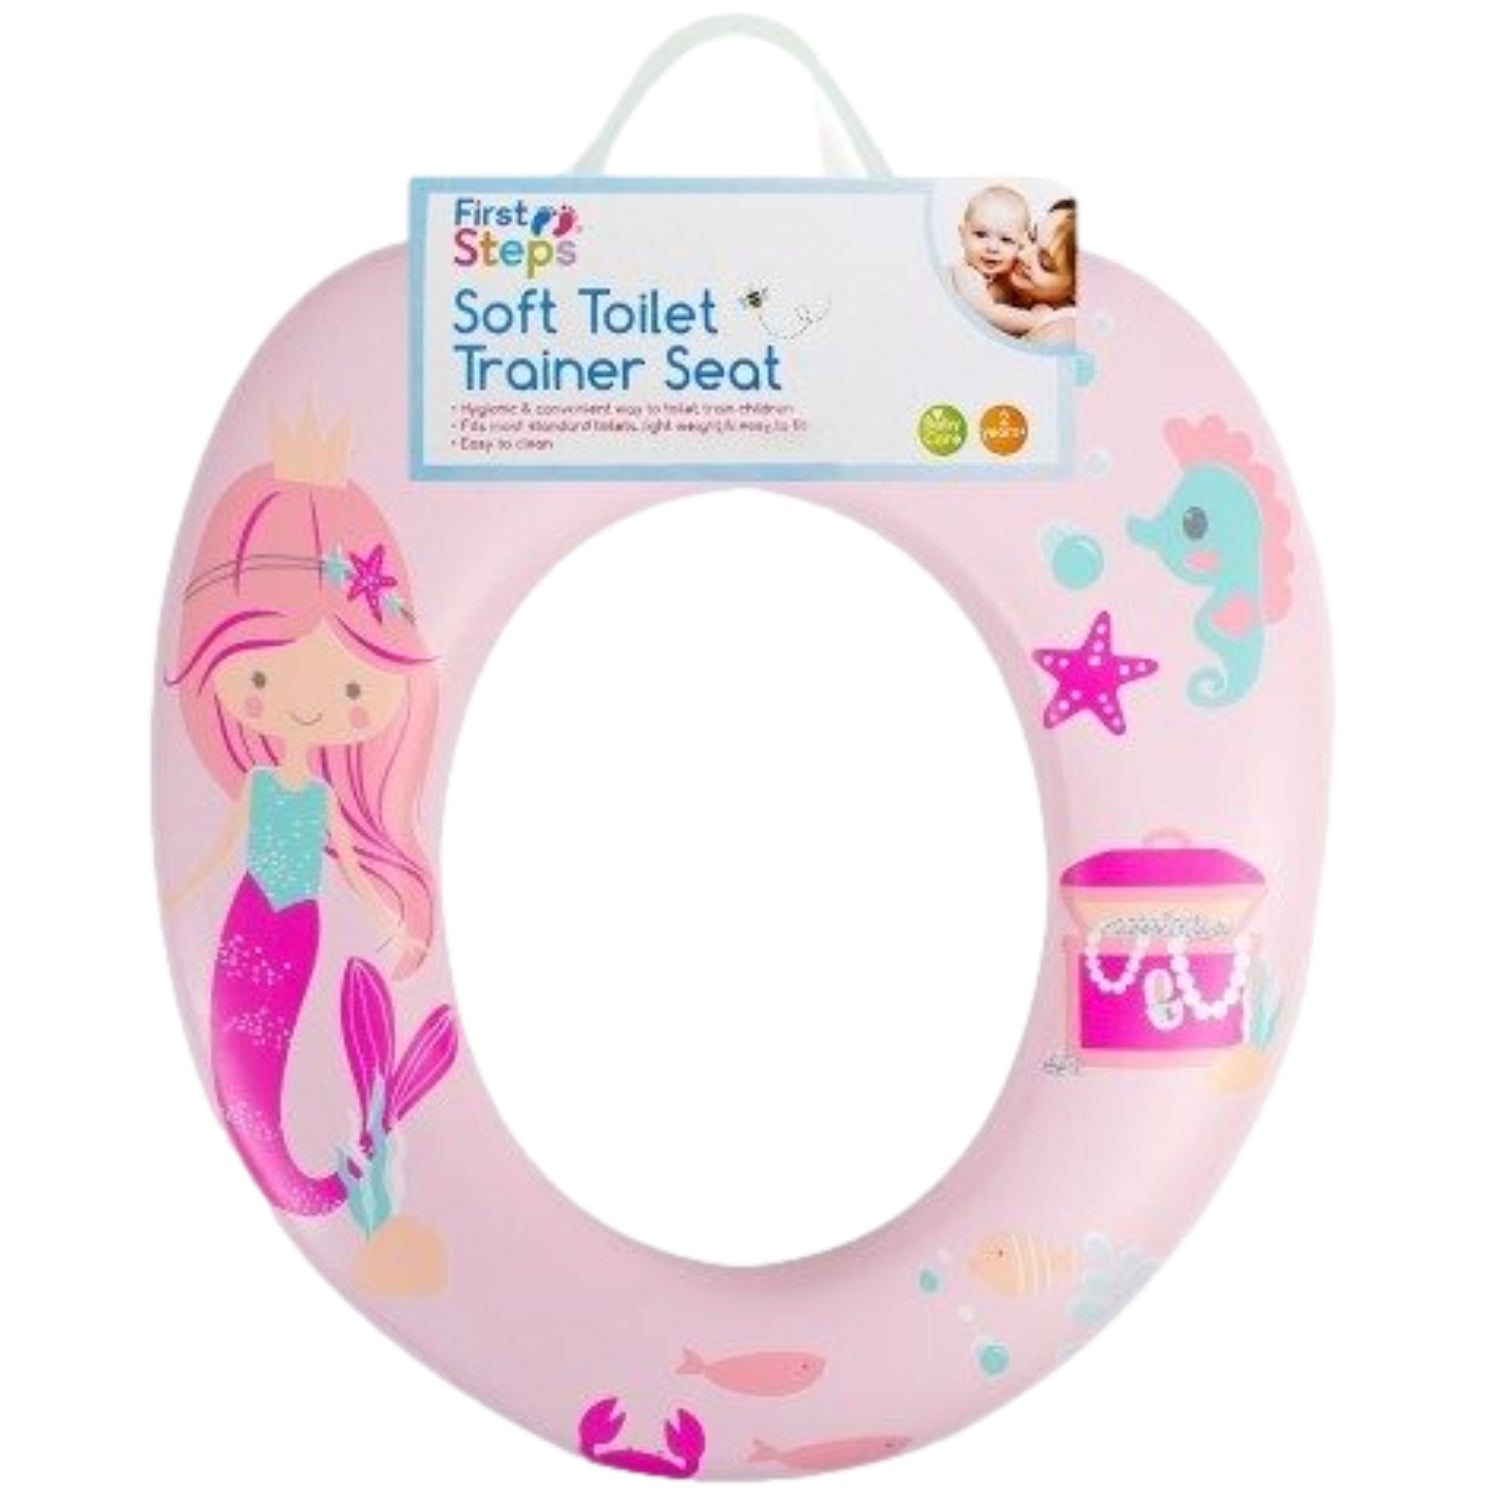 Soft Toilet Trainer Seat Mermaid Girls Potty Training Easy Fit Cushioned Seat